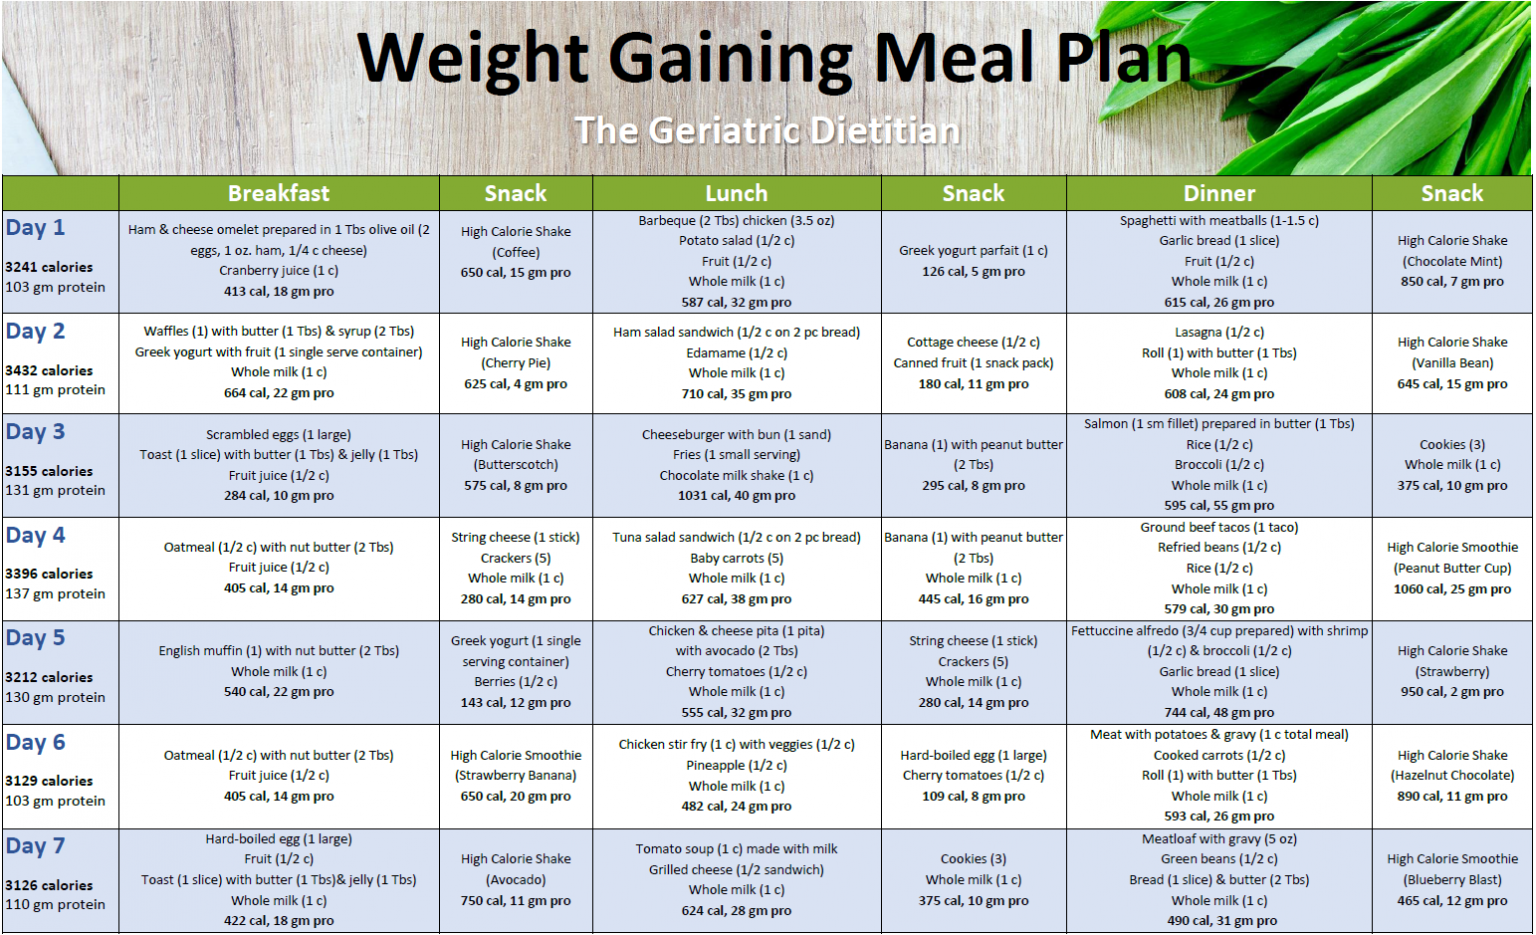 free-7-day-weight-gaining-meal-plan-3-000-calories-the-geriatric